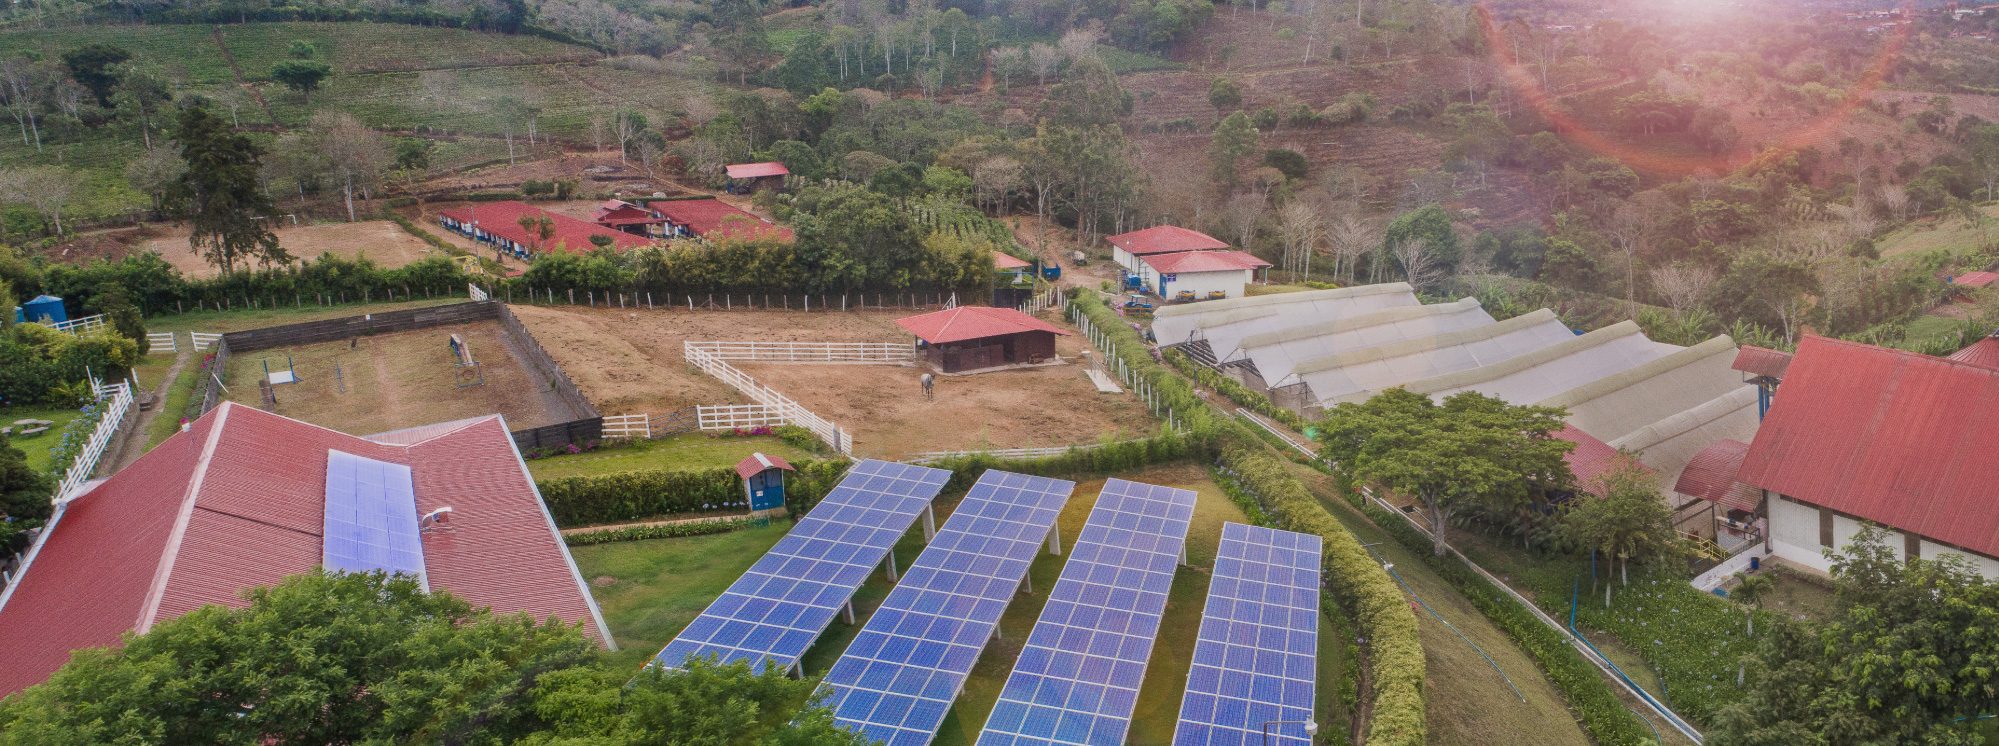 Solar panels and energy storage in Costa Rica